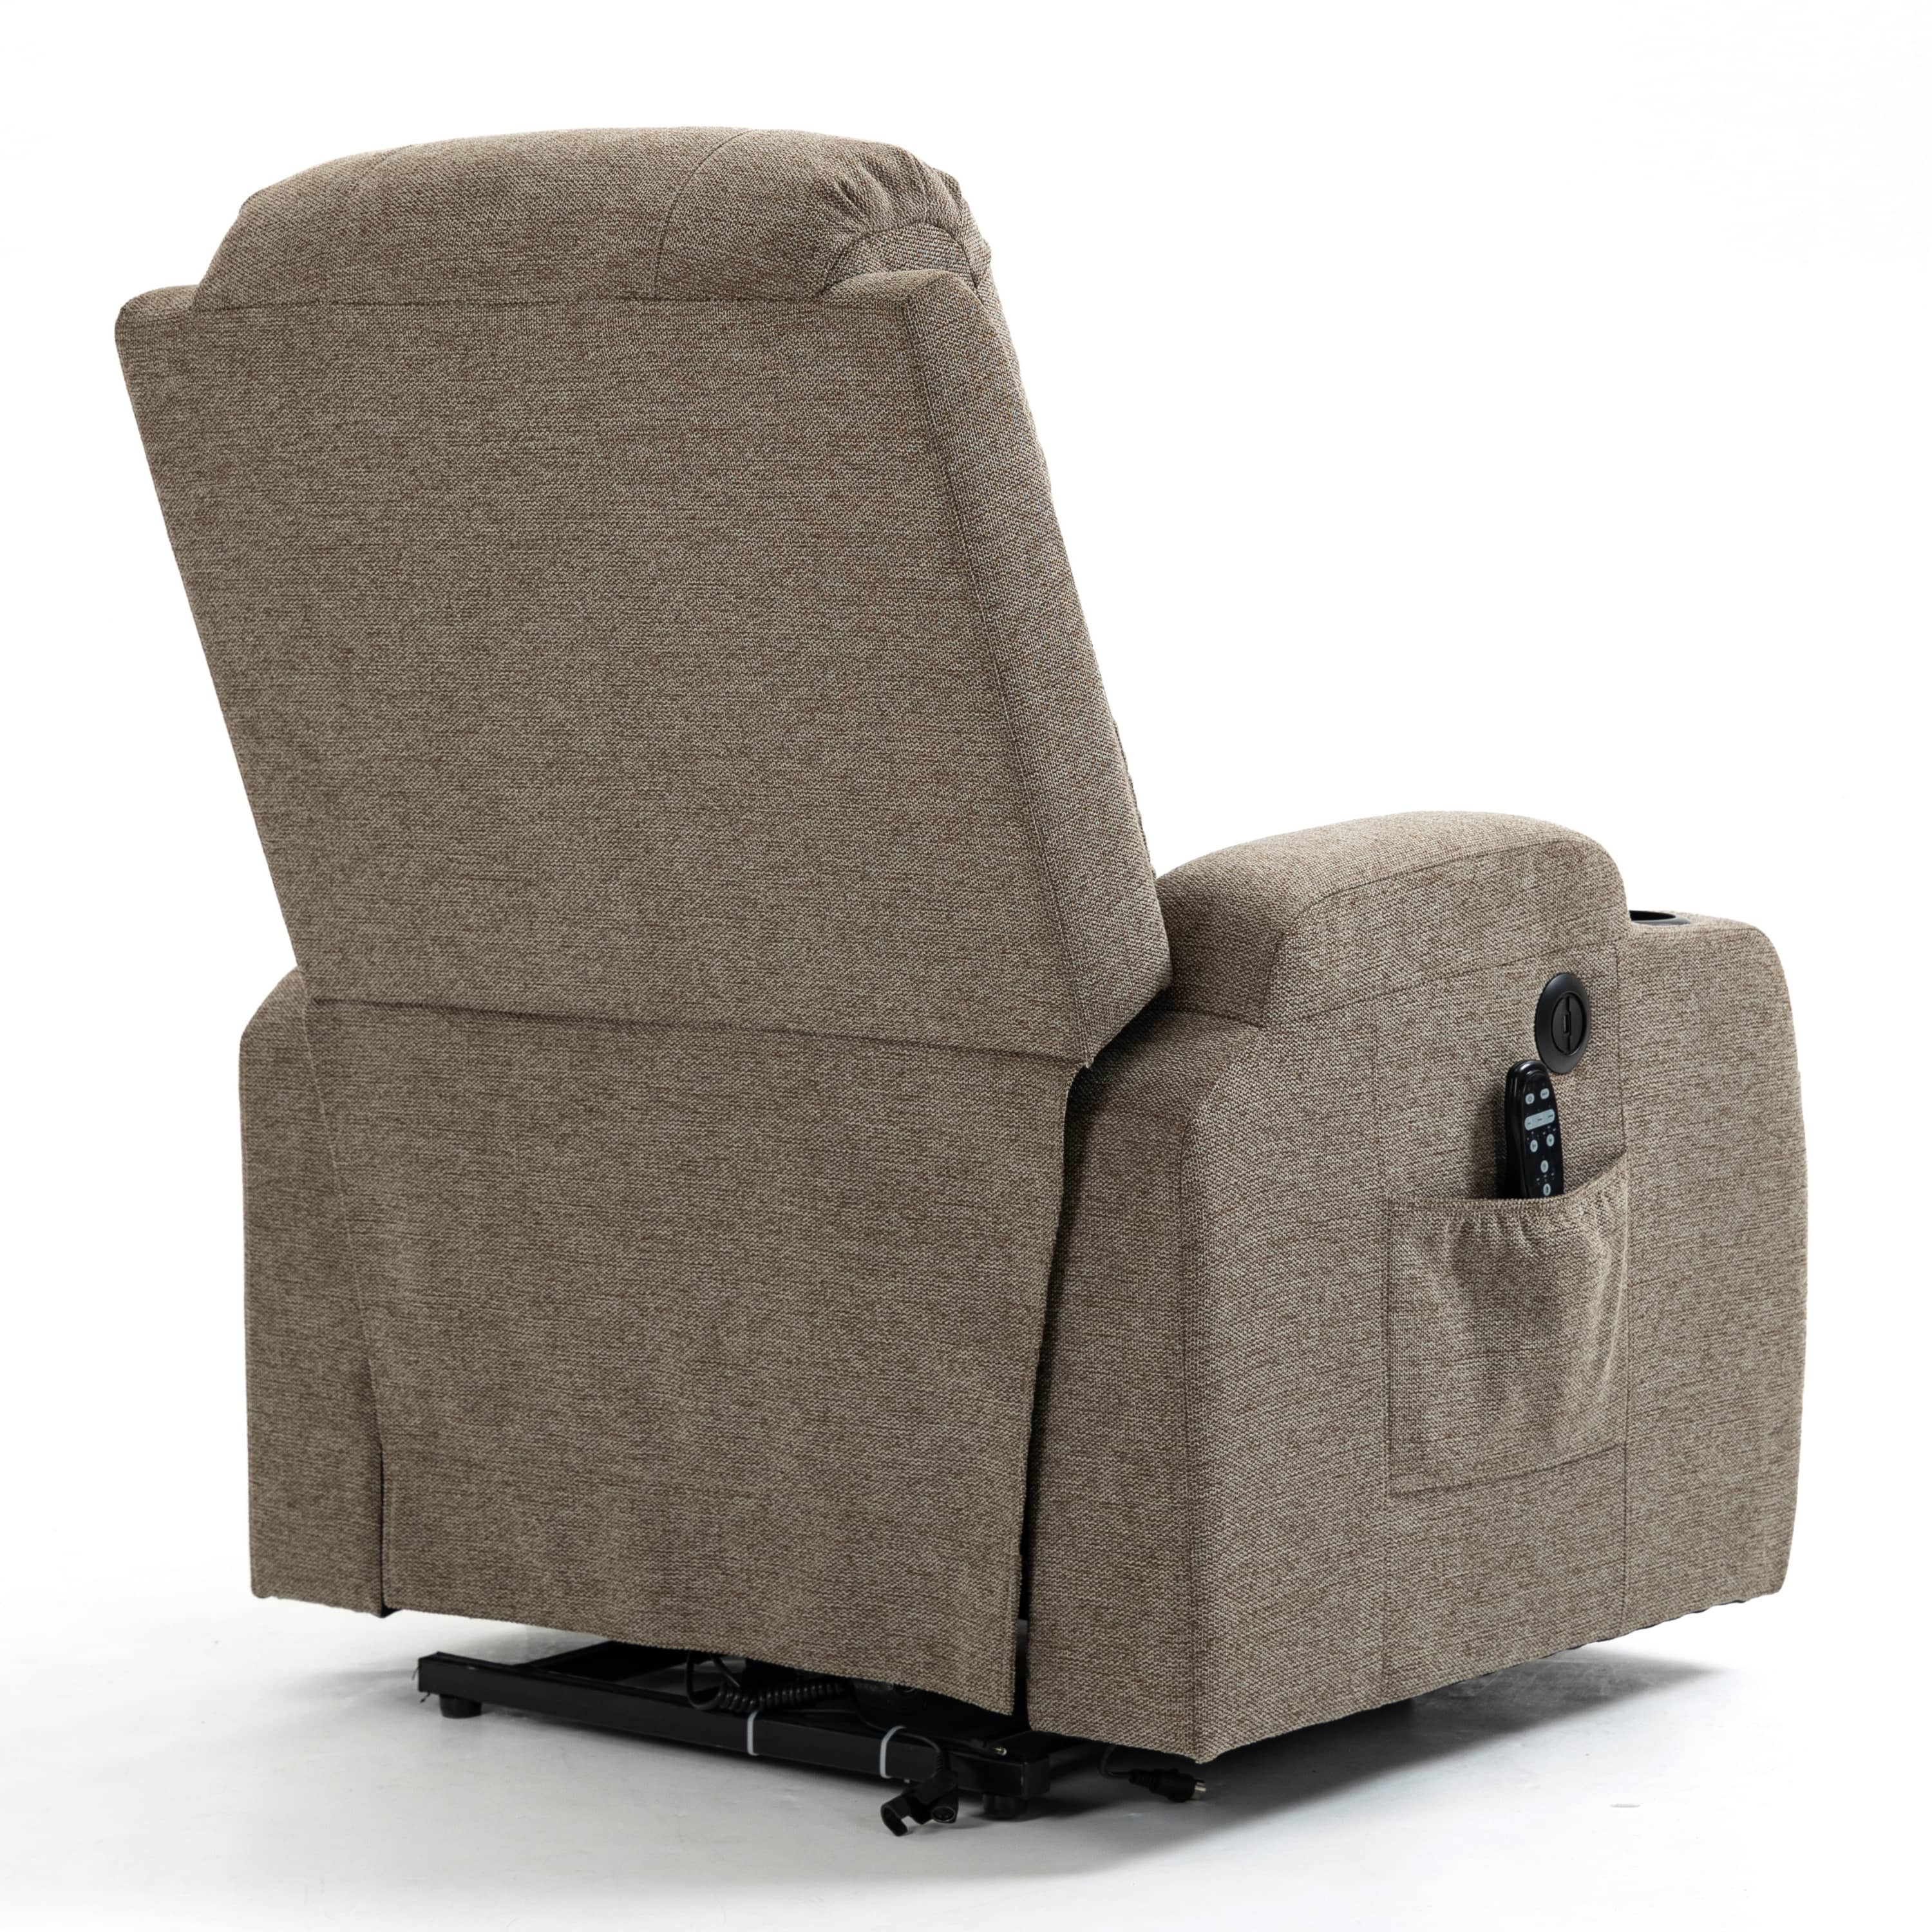 Infinite Position Heavy Duty Power Lift Recliner with Massage and Heat, back view